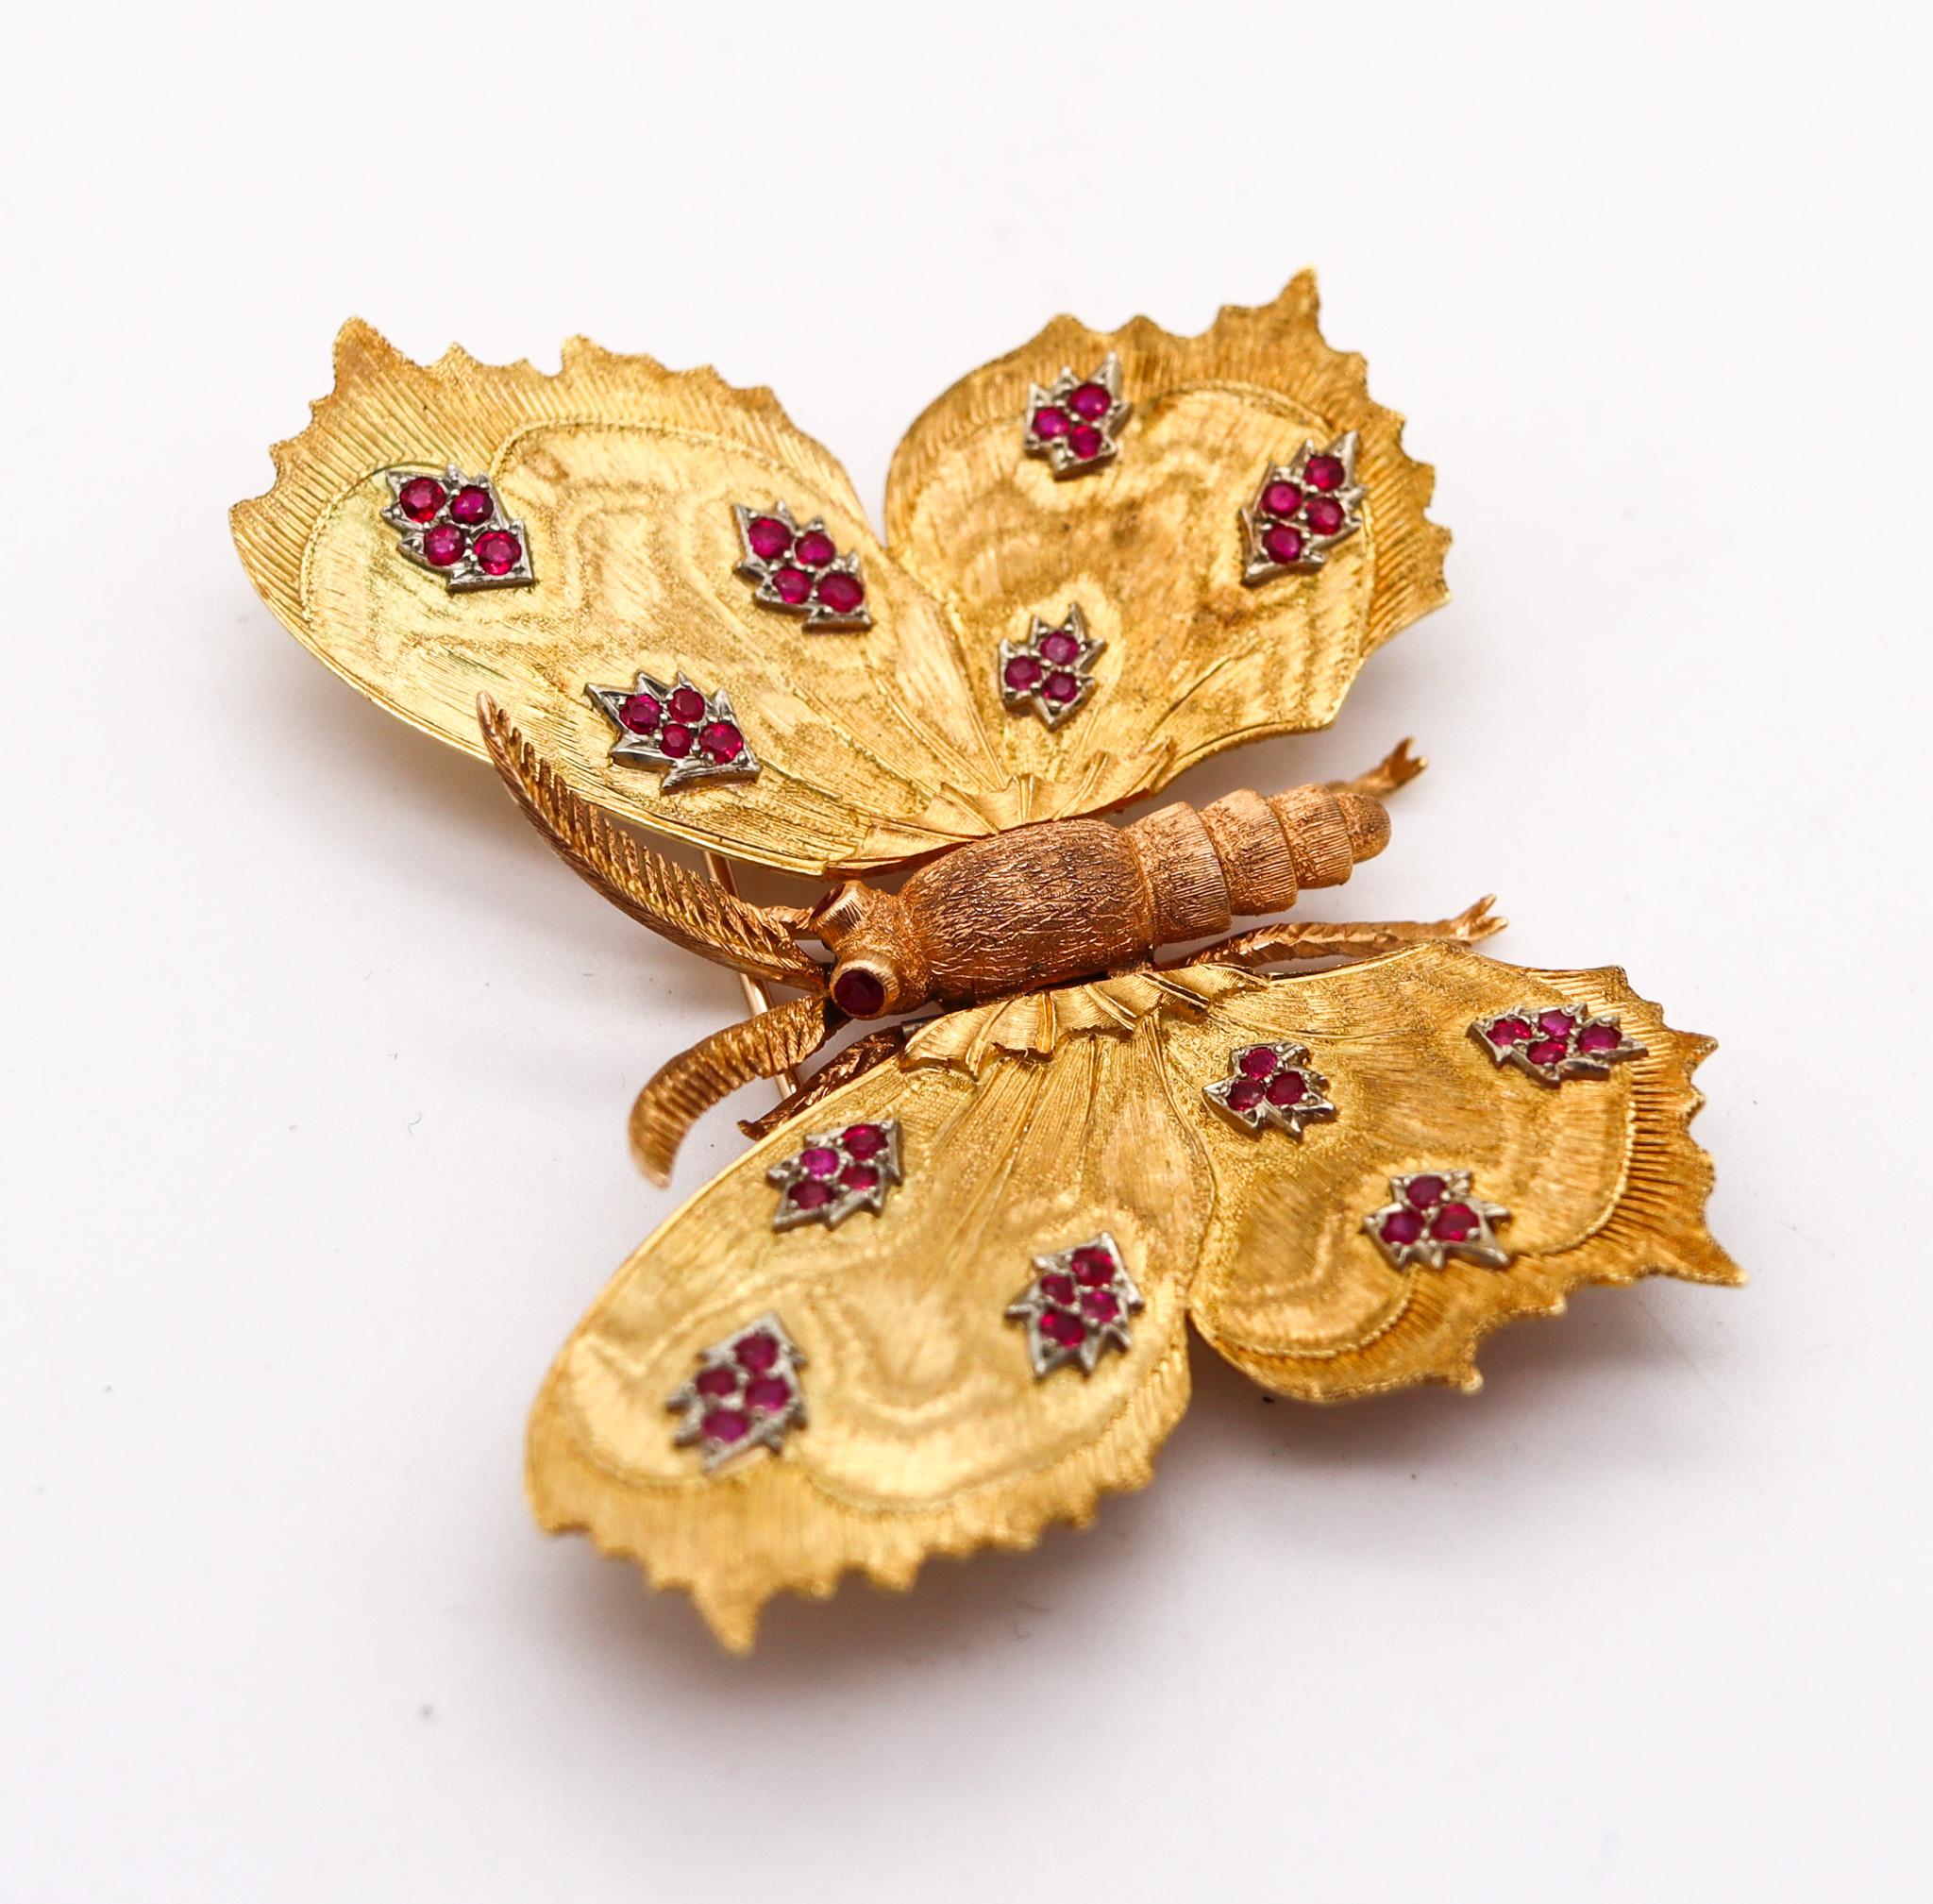 Butterfly brooch designed by Mario Buccellati.

A beautiful iconic piece. created in Milano Italy by the famous house of Buccellati, back in the late 1970. This rare brooch was carefully crafted by Mario Buccellati itself, in the shape of a flying